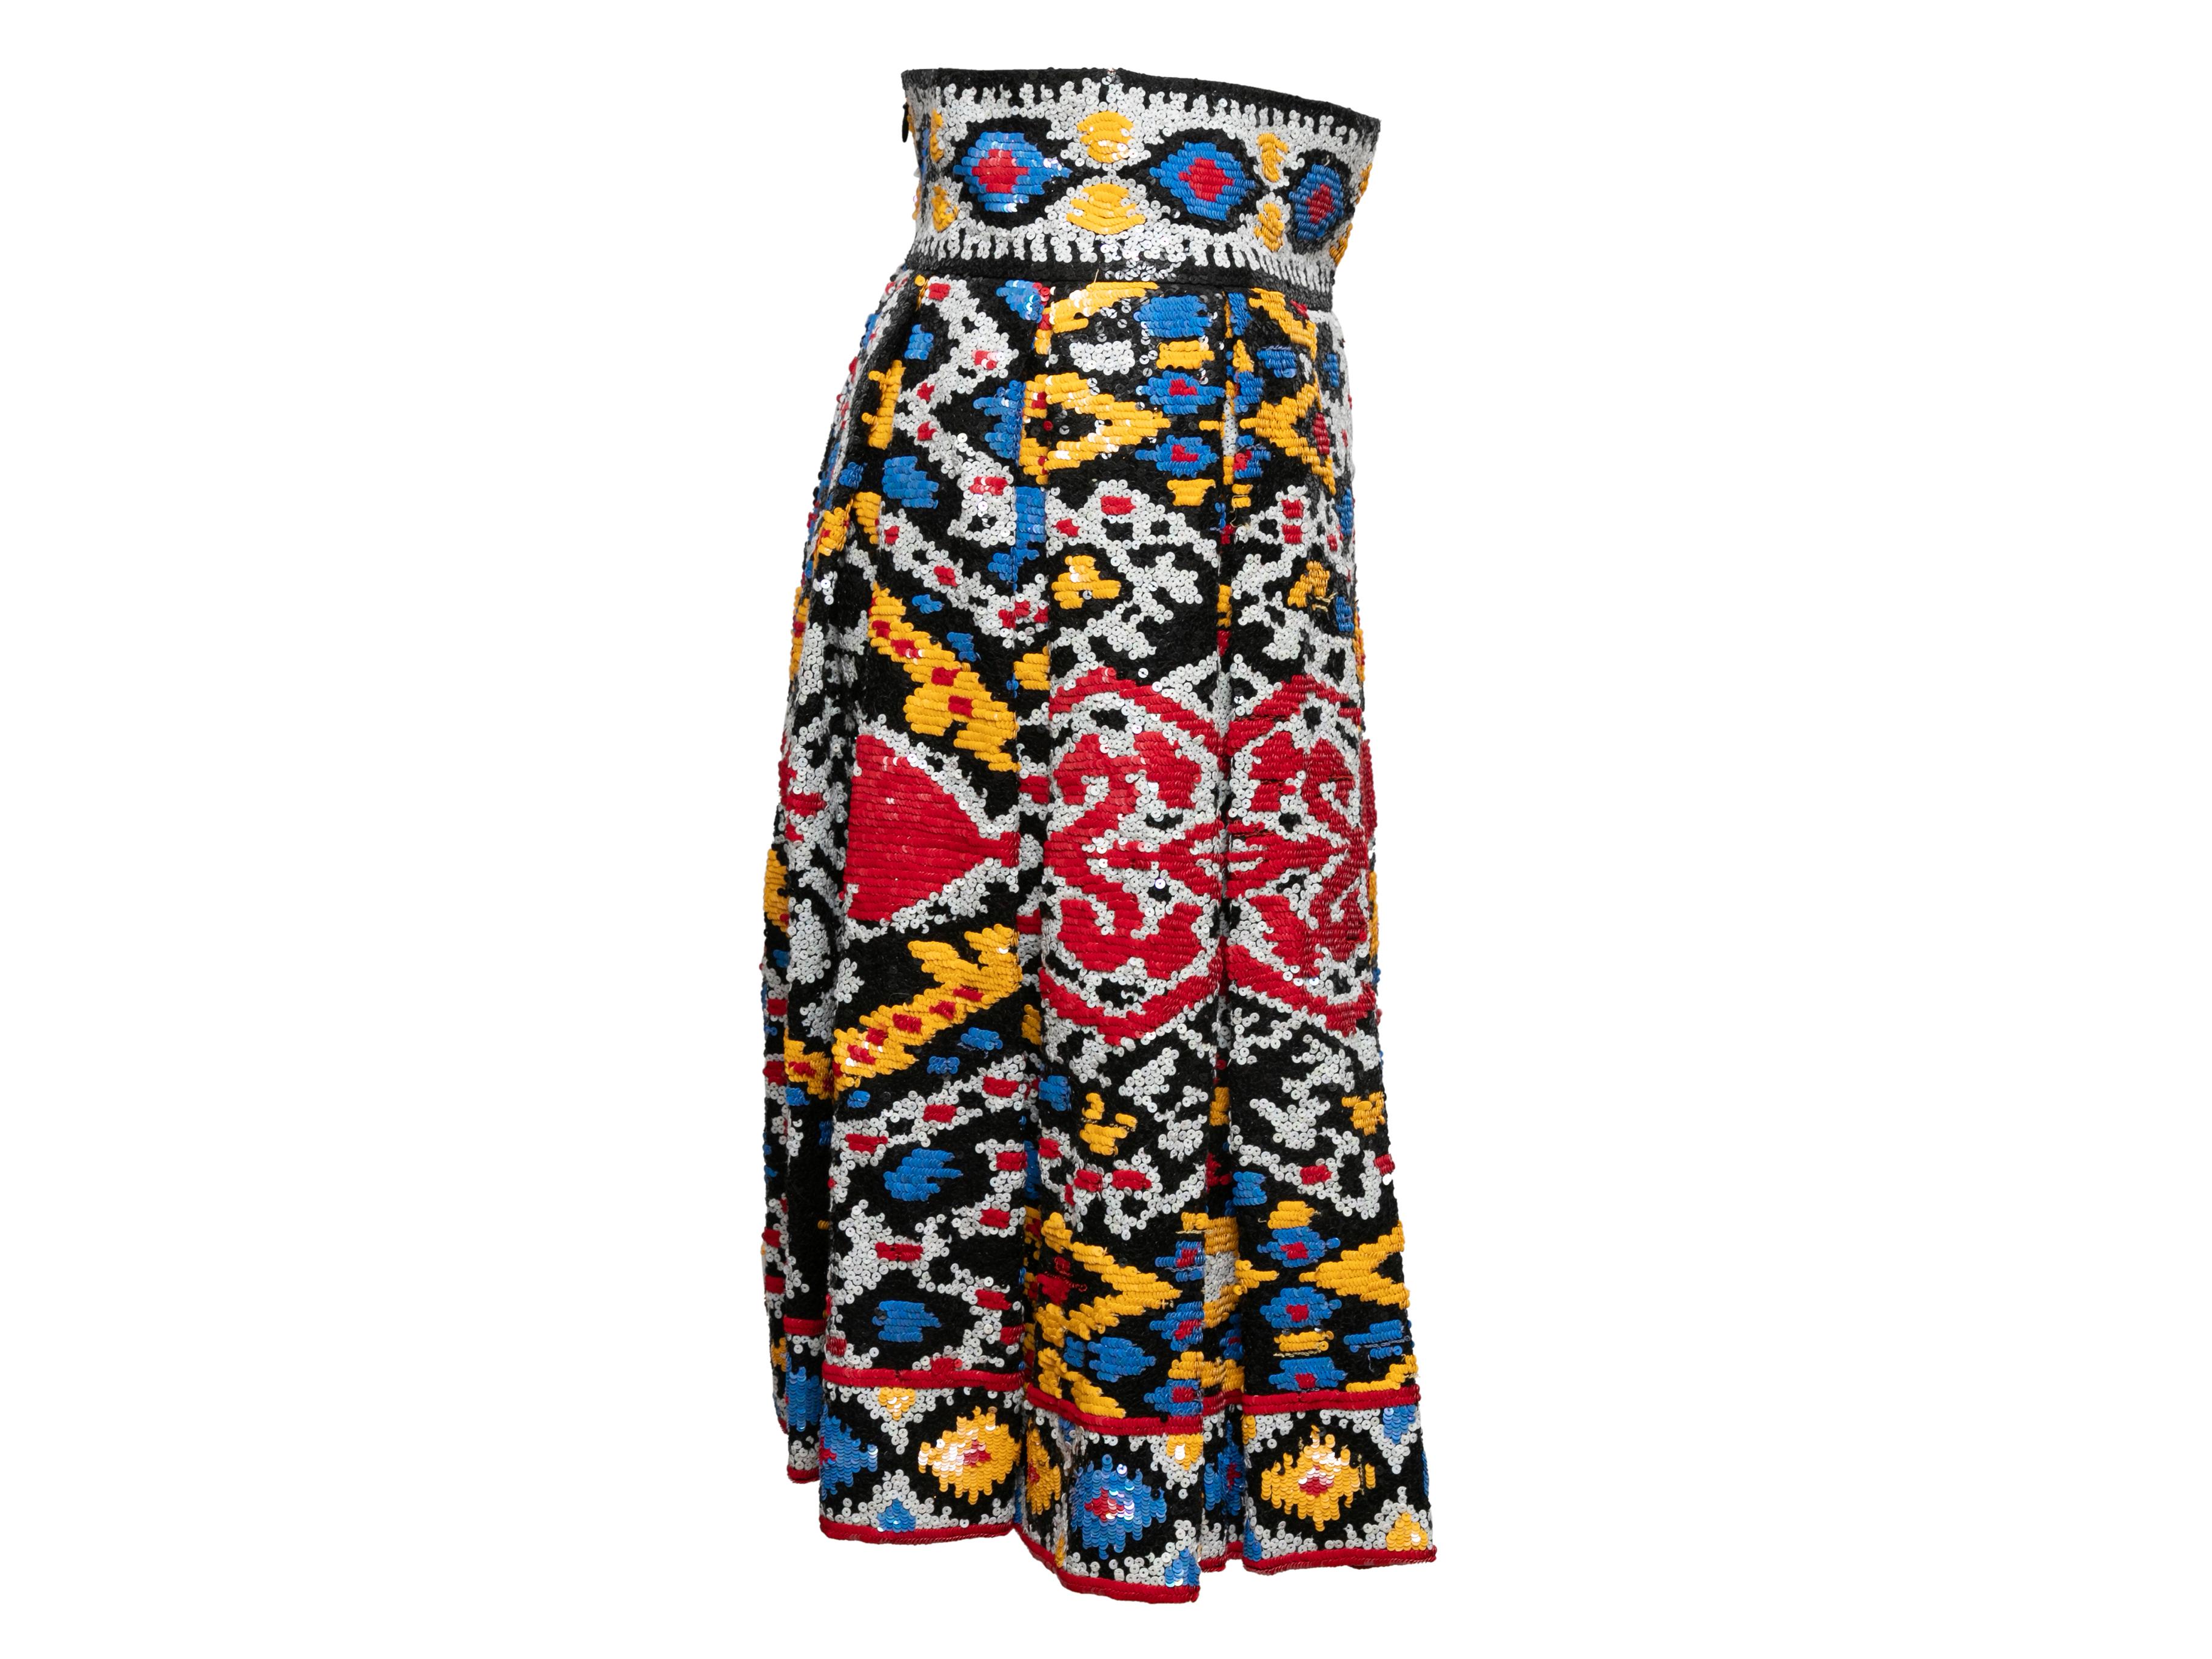 Multicolor silk pleated sequin-embellished skirt by Naeem Khan. Abstract pattern throughout. Zip closure at back. 29